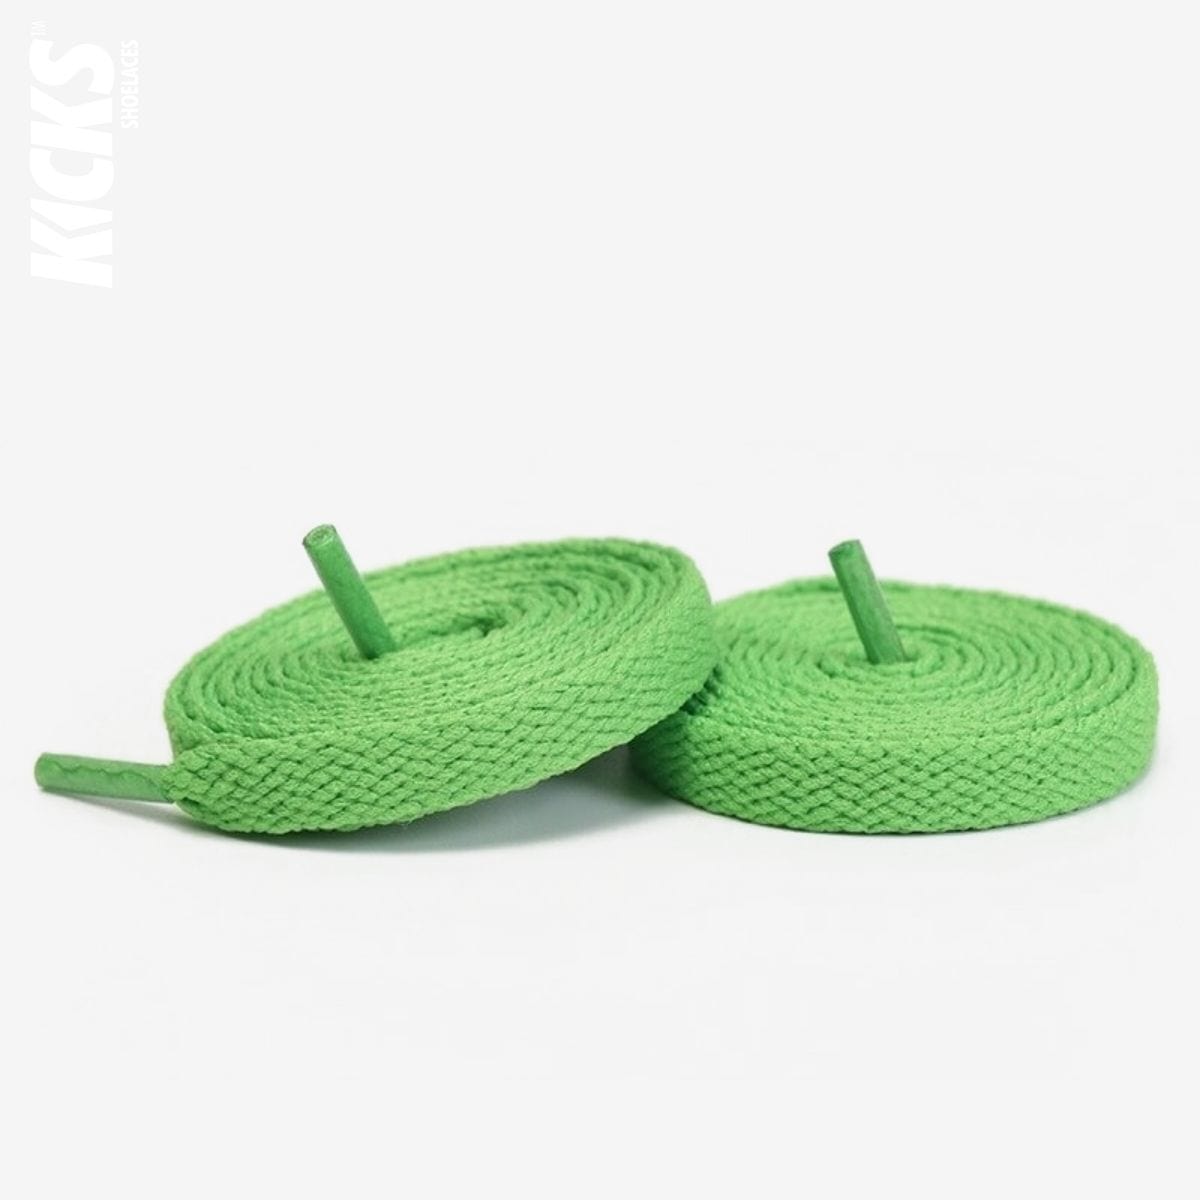 bright-green-fun-shoelaces-suitable-for-tying shoelaces-on-popular-sneakers